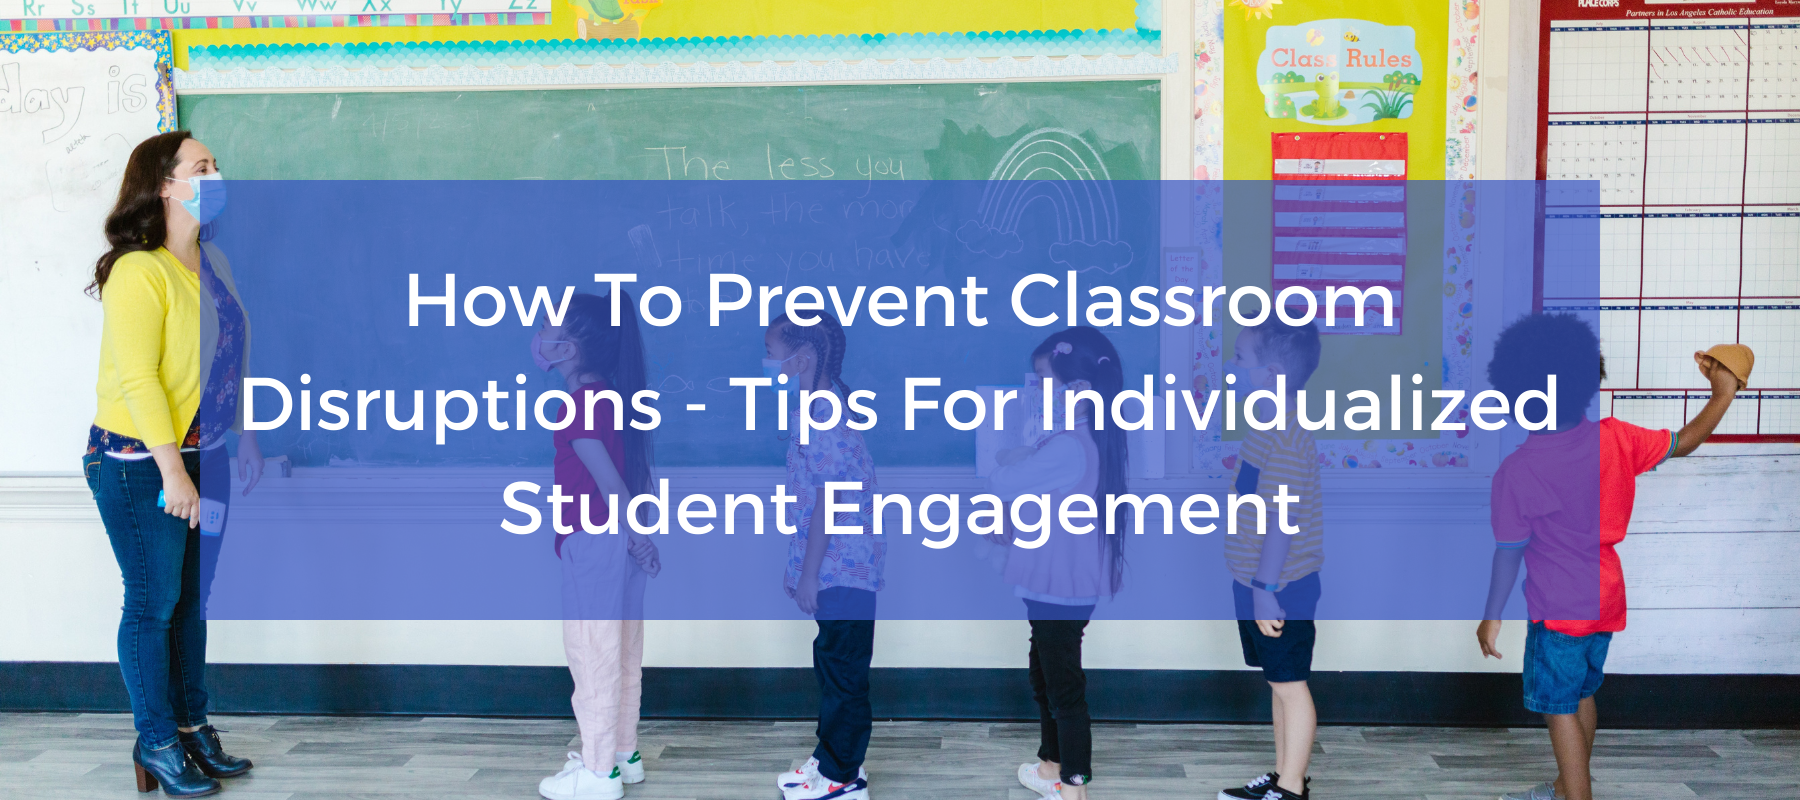 how to prevent classroom disruptions student engagement featured.